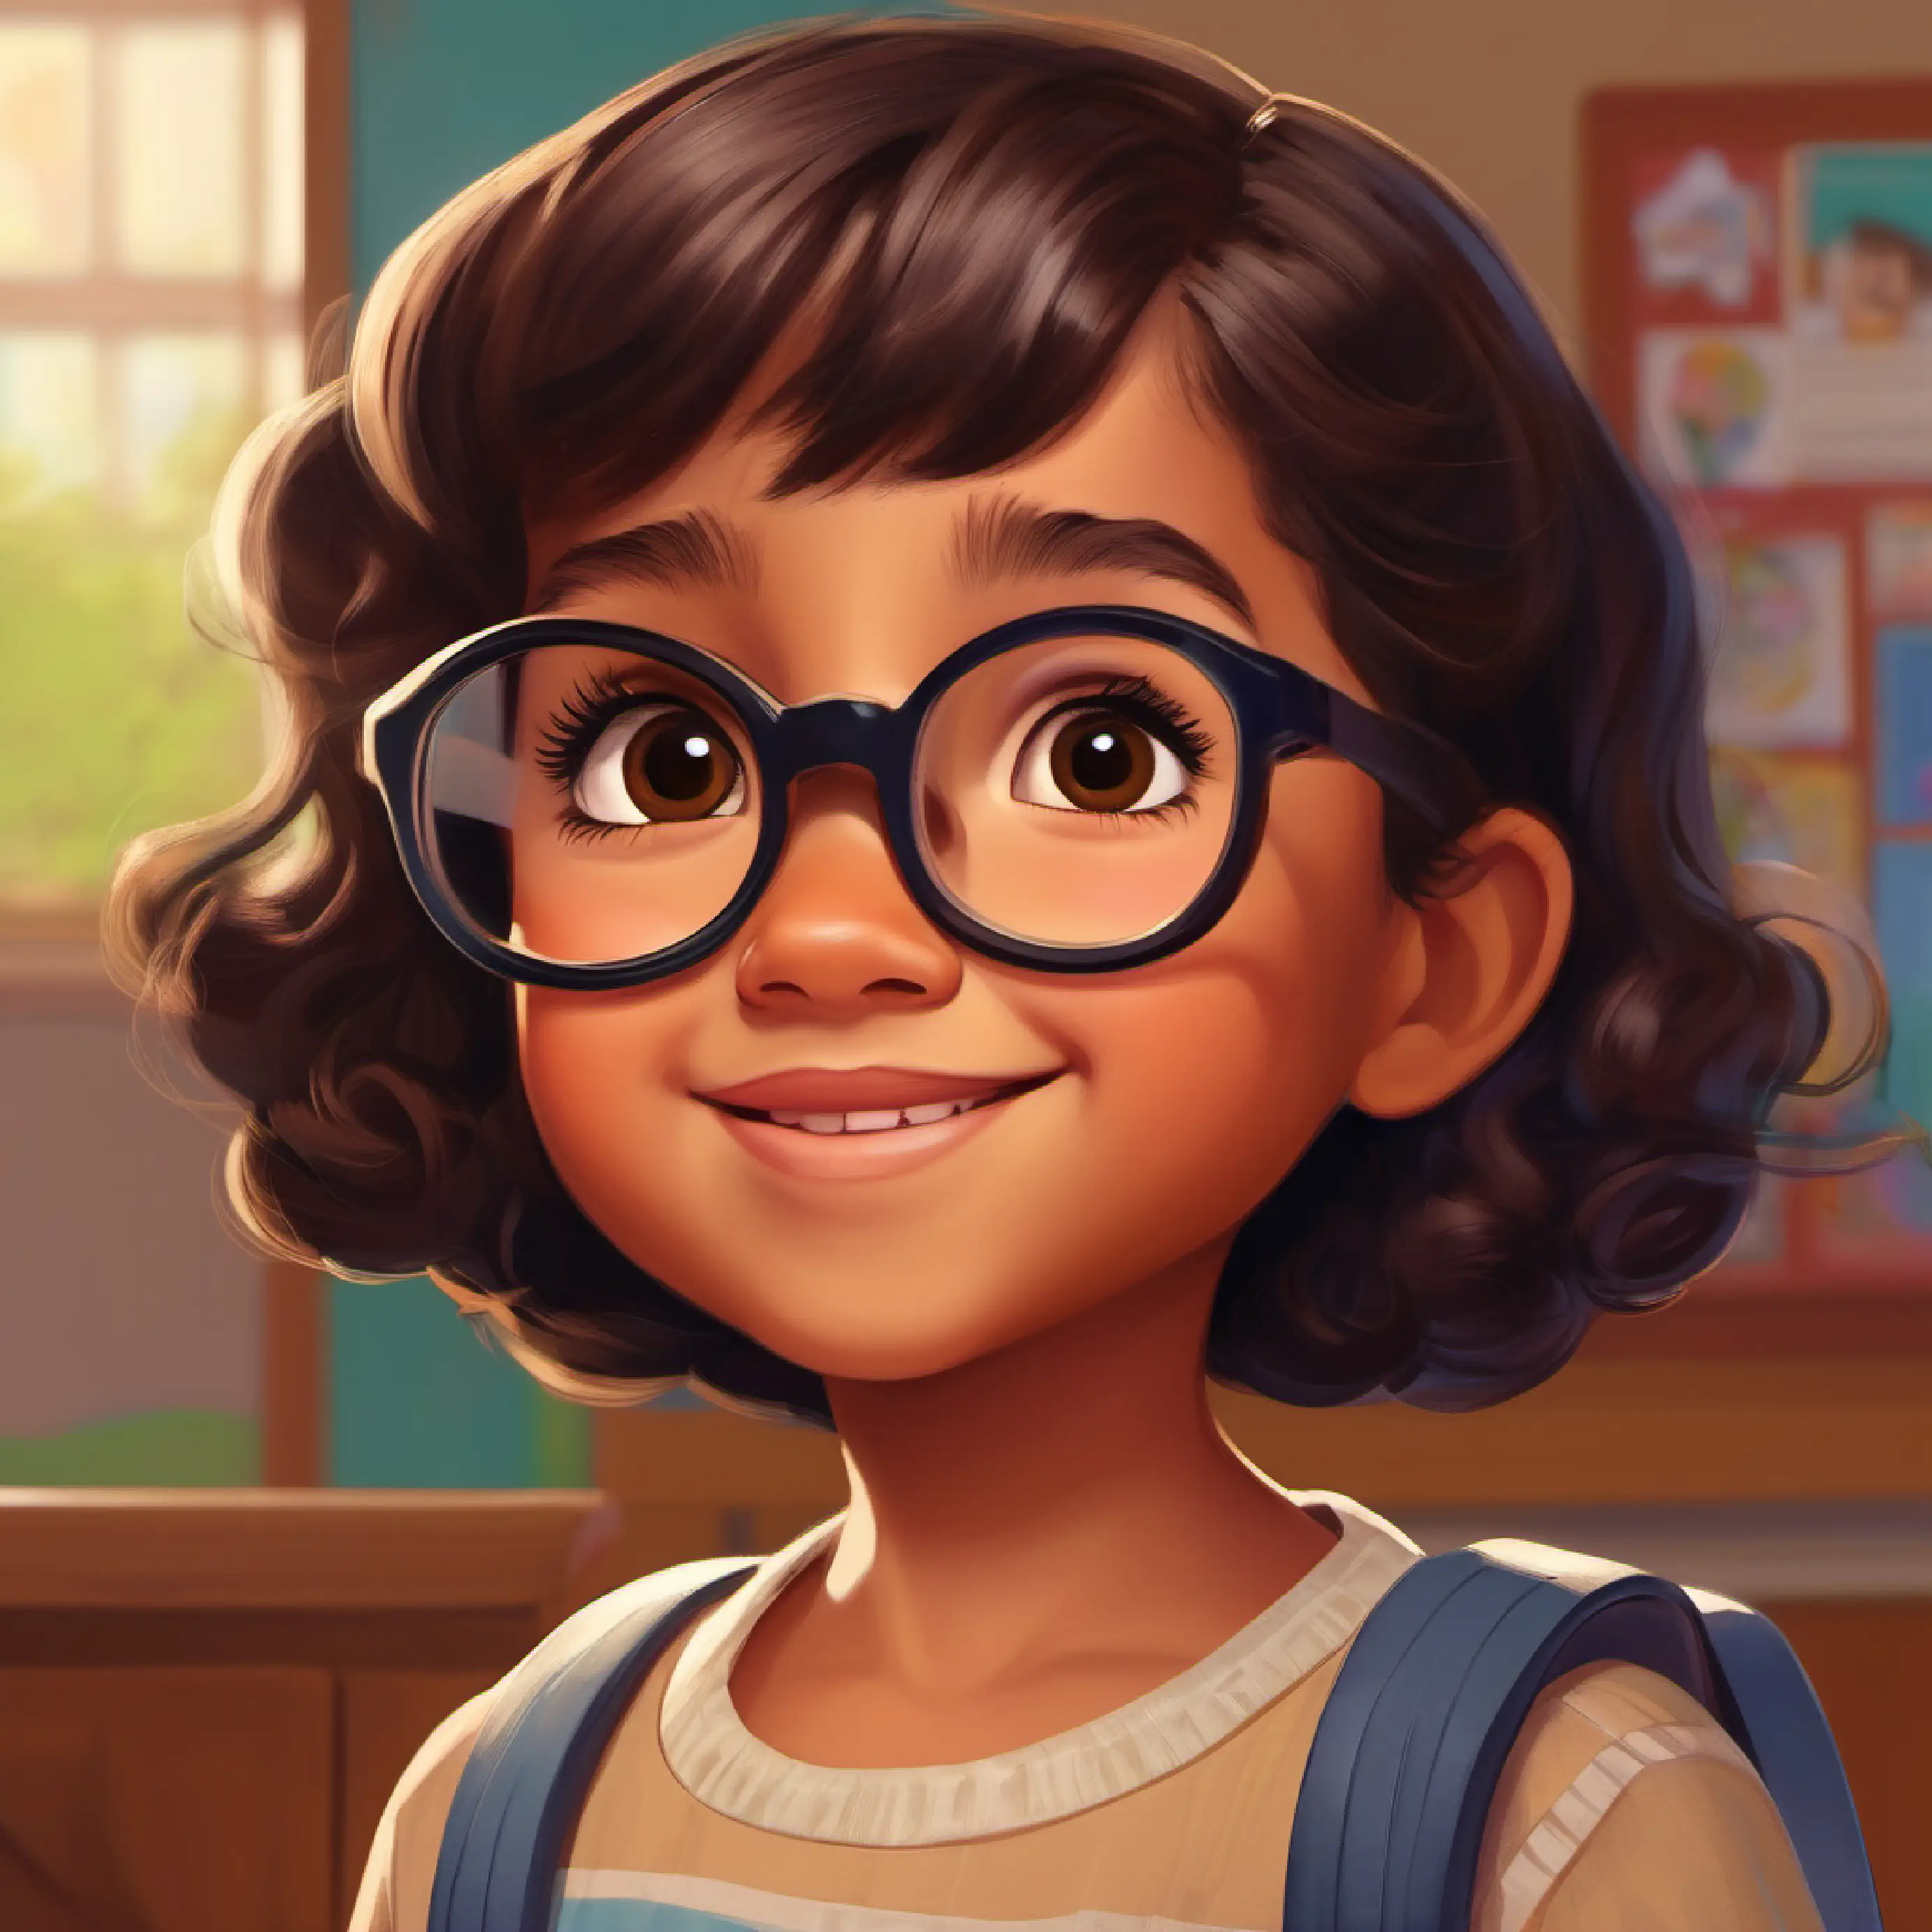 Nayeli talking to other kids in her classroom while wearing her glasses